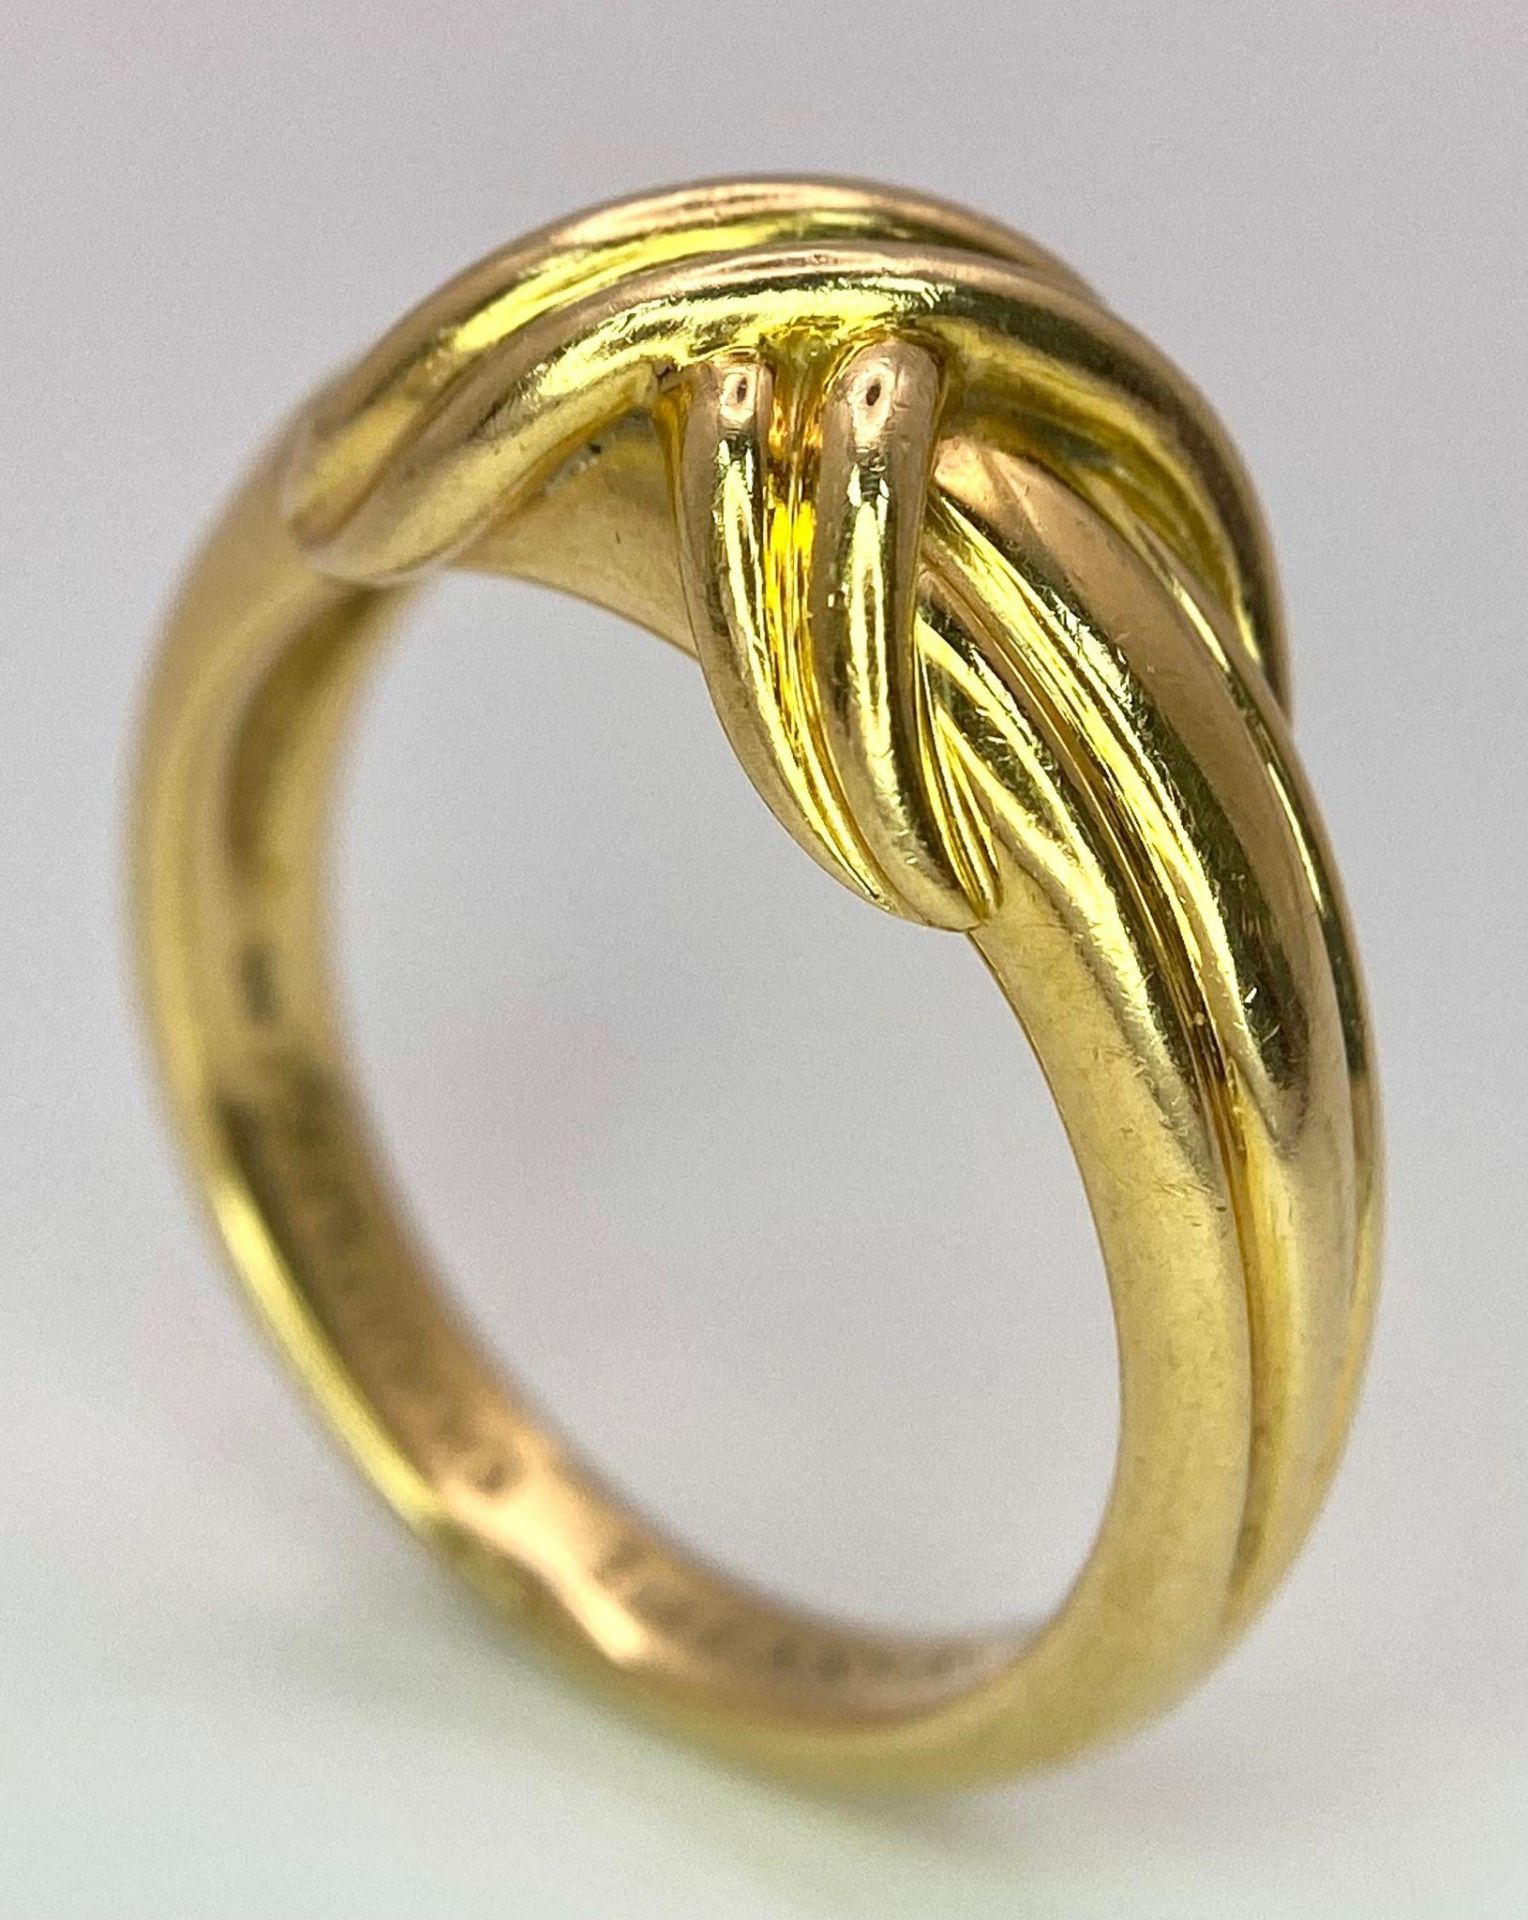 A Beautiful Tiffany and Co. 18K Gold Love Ring. Tiffany and co. markings. Size N. 7.2g weight. - Image 4 of 10